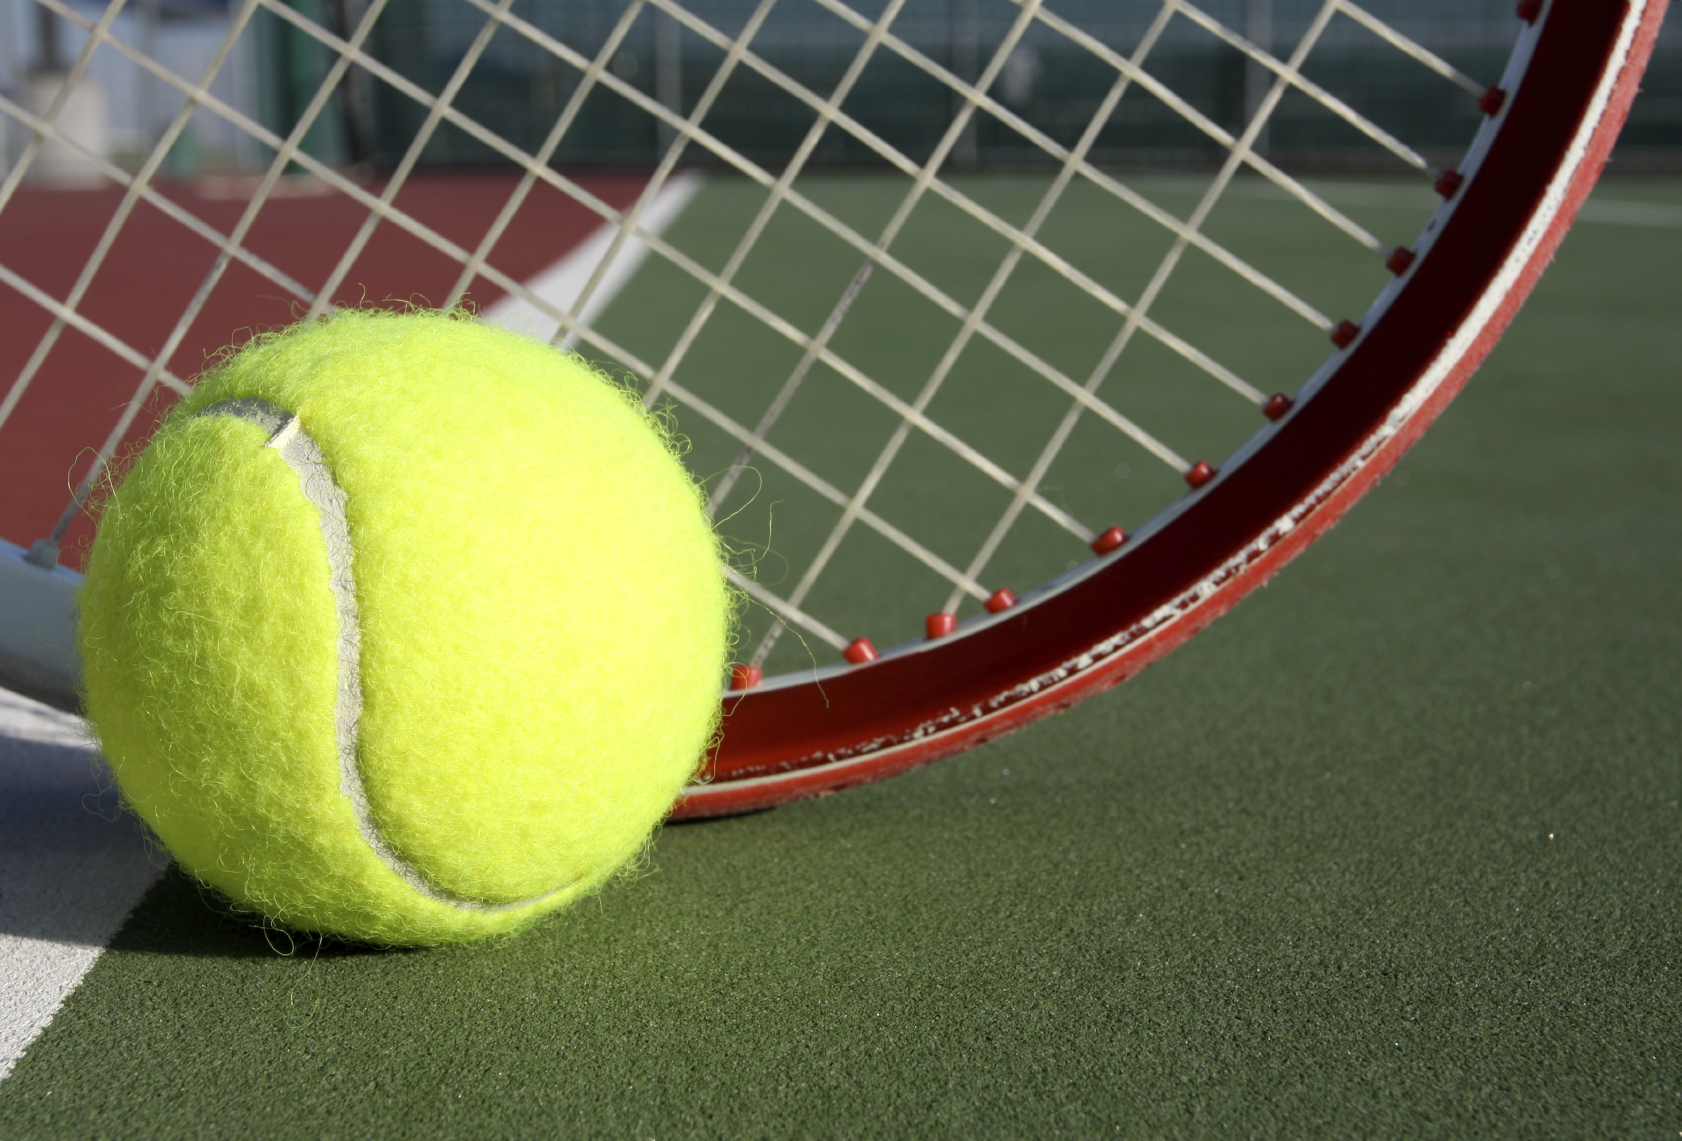 Treating Tennis Injuries and Tendinopathy: Advice From an Expert - Astym